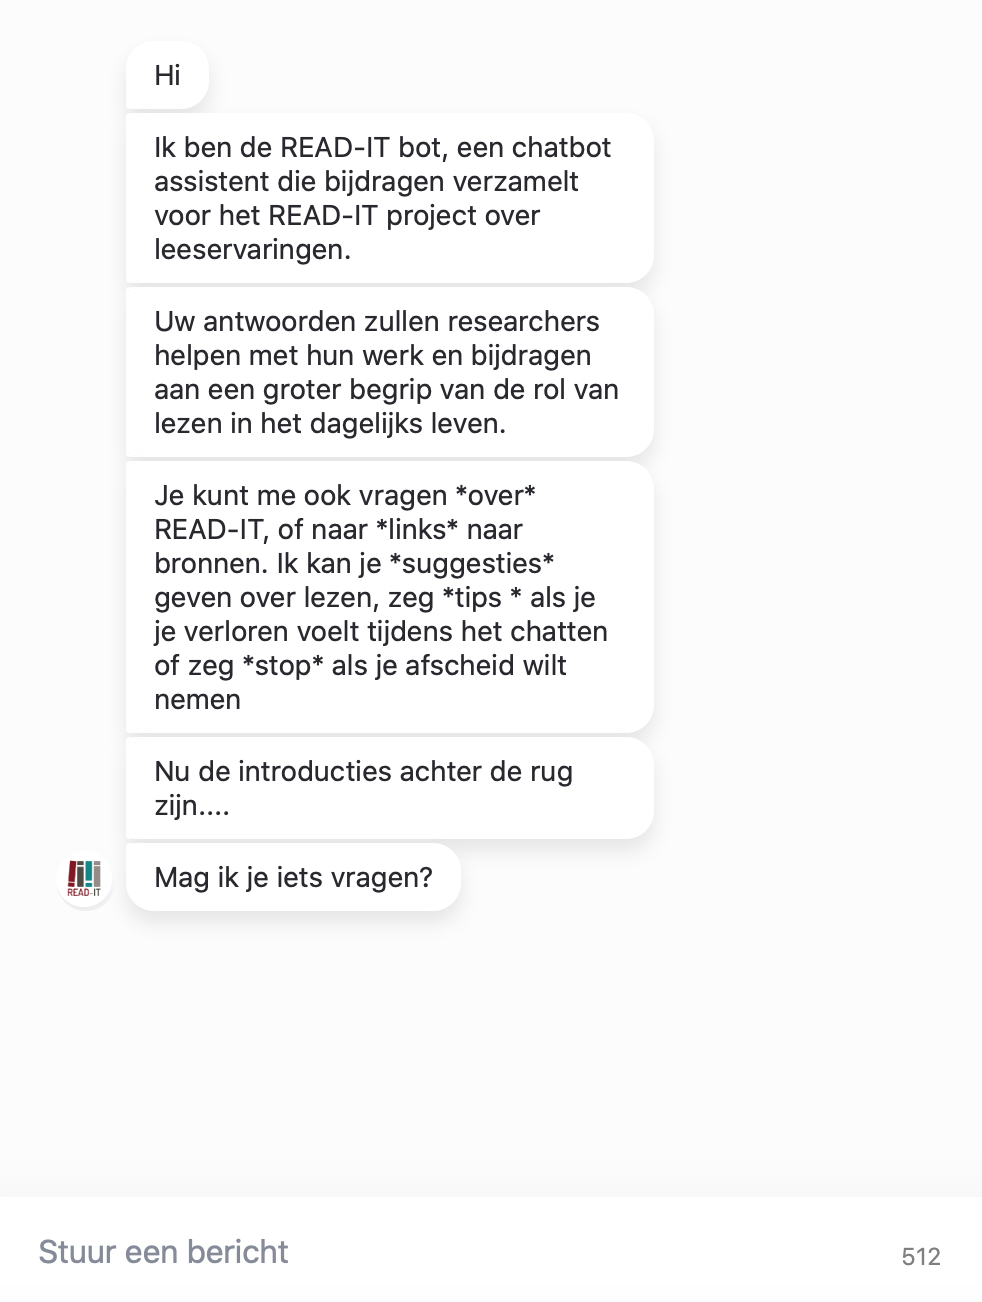 READ-IT Dutch chatbot launched (10.03.2021)